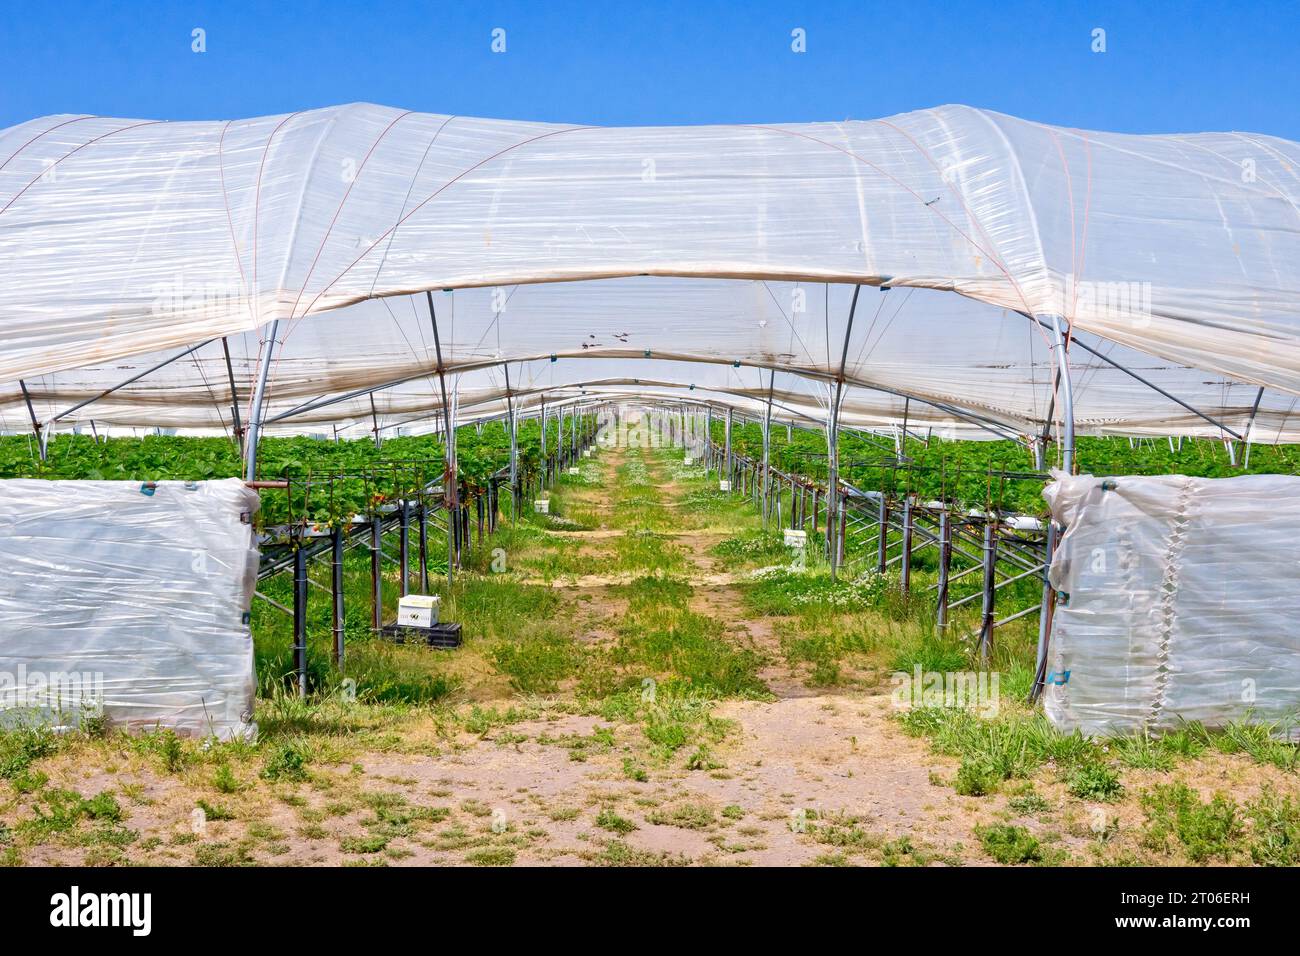 The entrance to a polytunnel on an intensive soft fruit farm on the east coast of Scotland, showing rows of benches dedicated to growing strawberries. Stock Photo